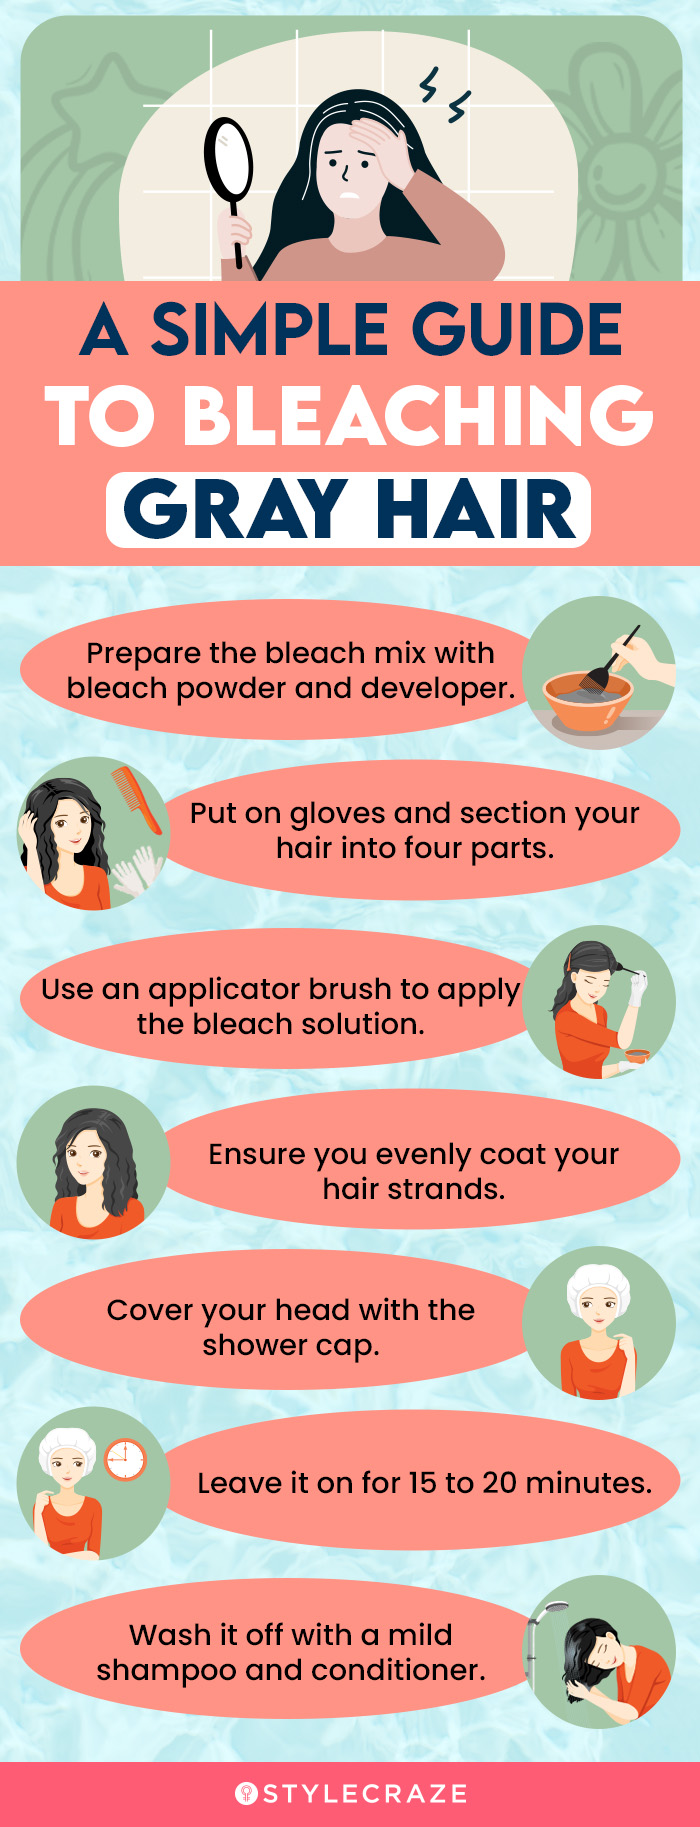 a simple guide to bleaching gray hair (infographic)